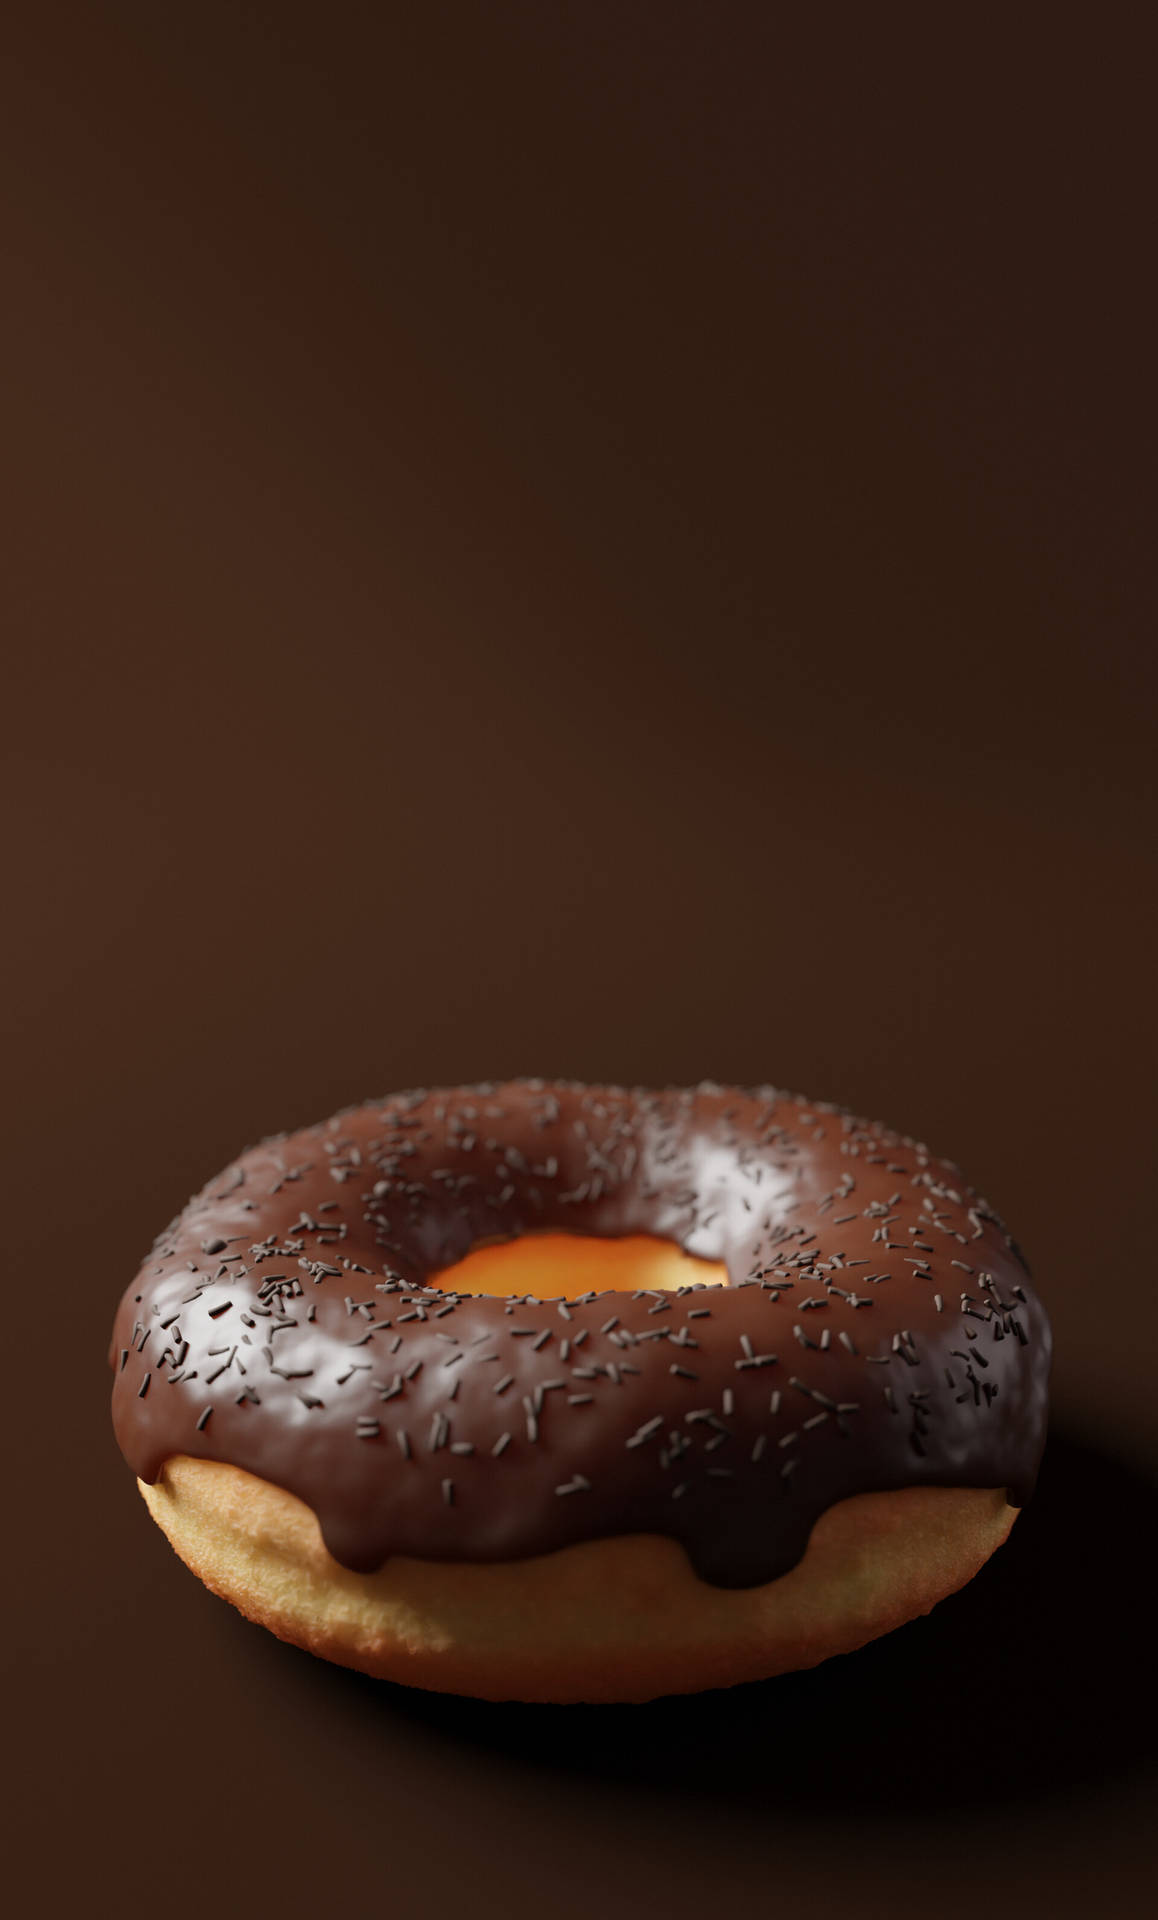 Chocolate Donut With Sprinkles Wallpaper